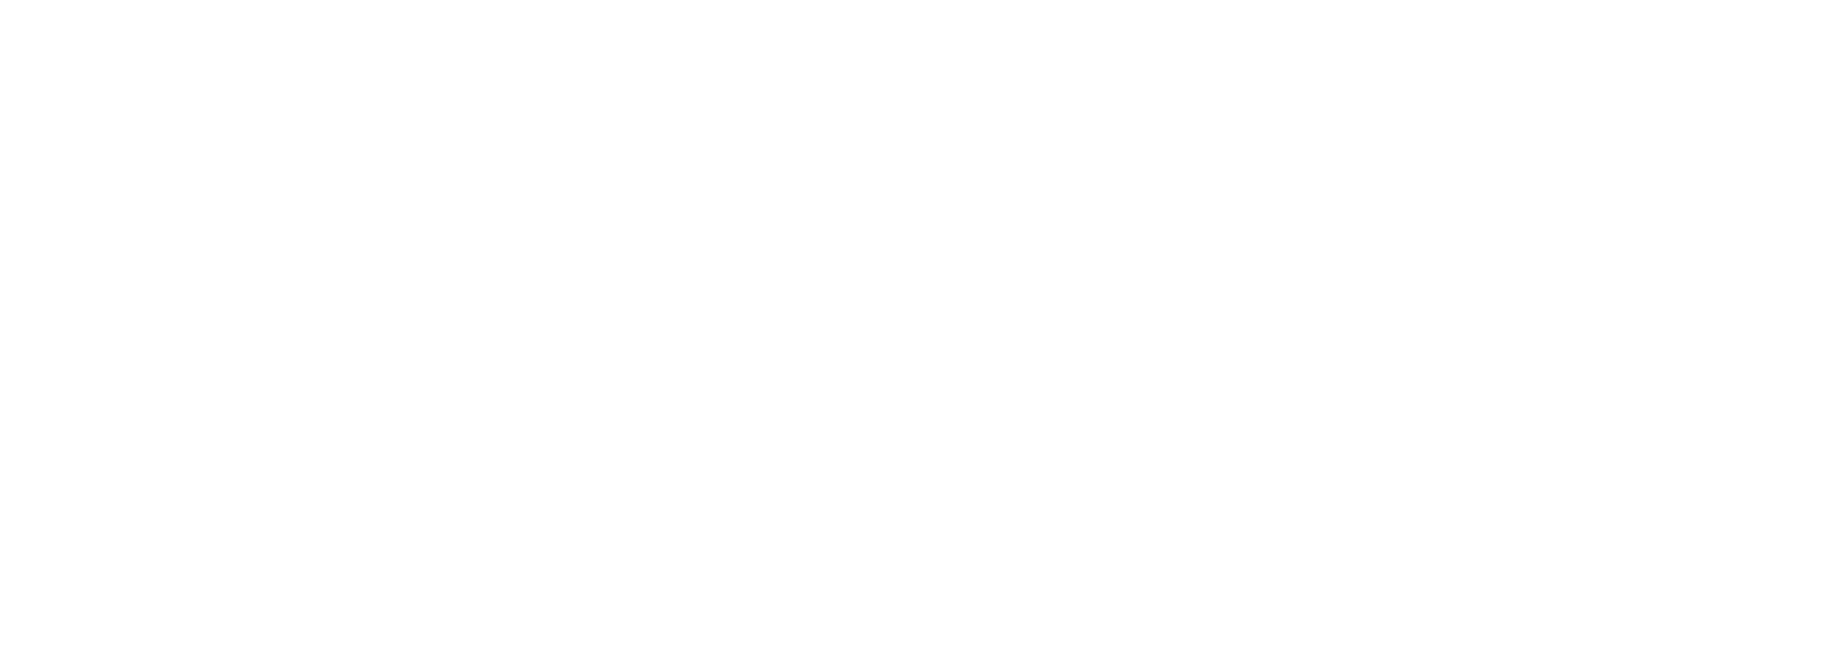 The Real Wild West Title